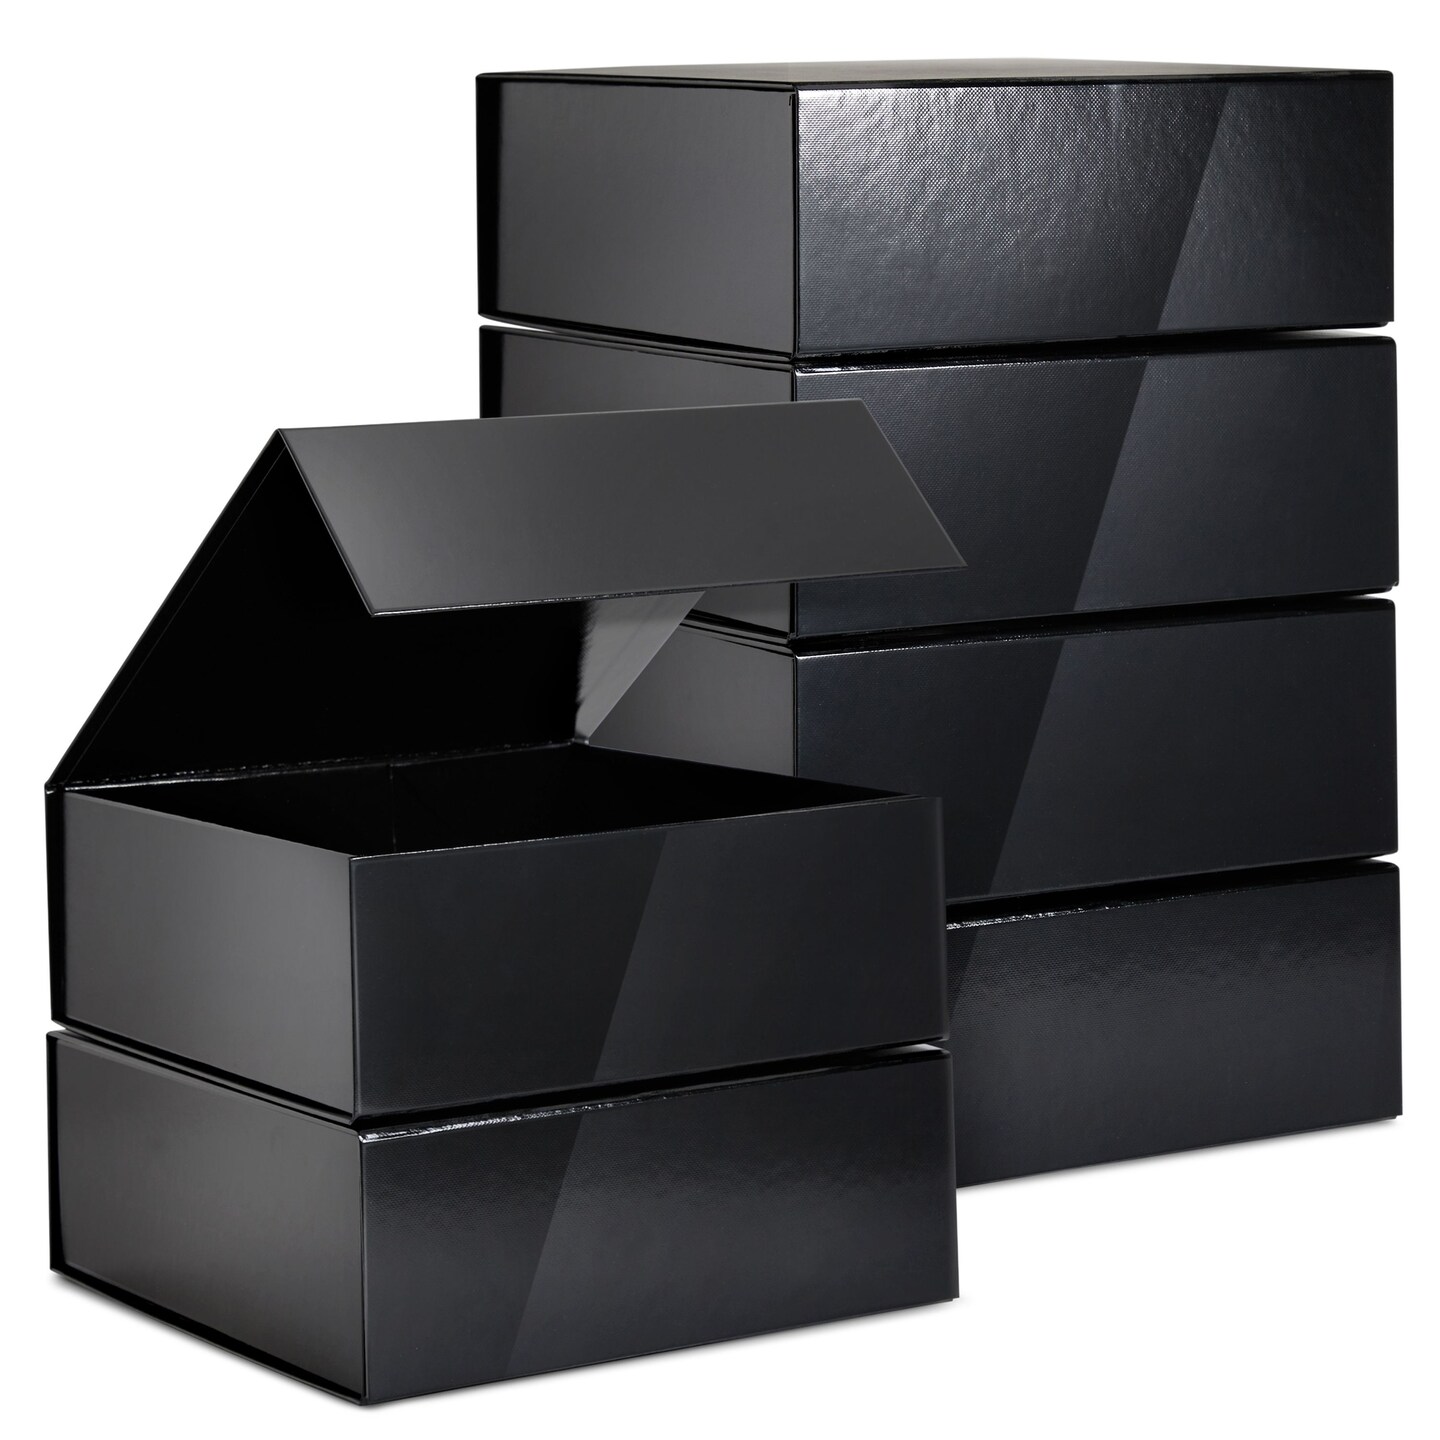 6 Pack Large Square Magnetic Gift Box with Lid, Groomsmen and Bridesmaid Boxes for Proposal, Glossy Black (9.5 x 9.5 x 3.5 In)